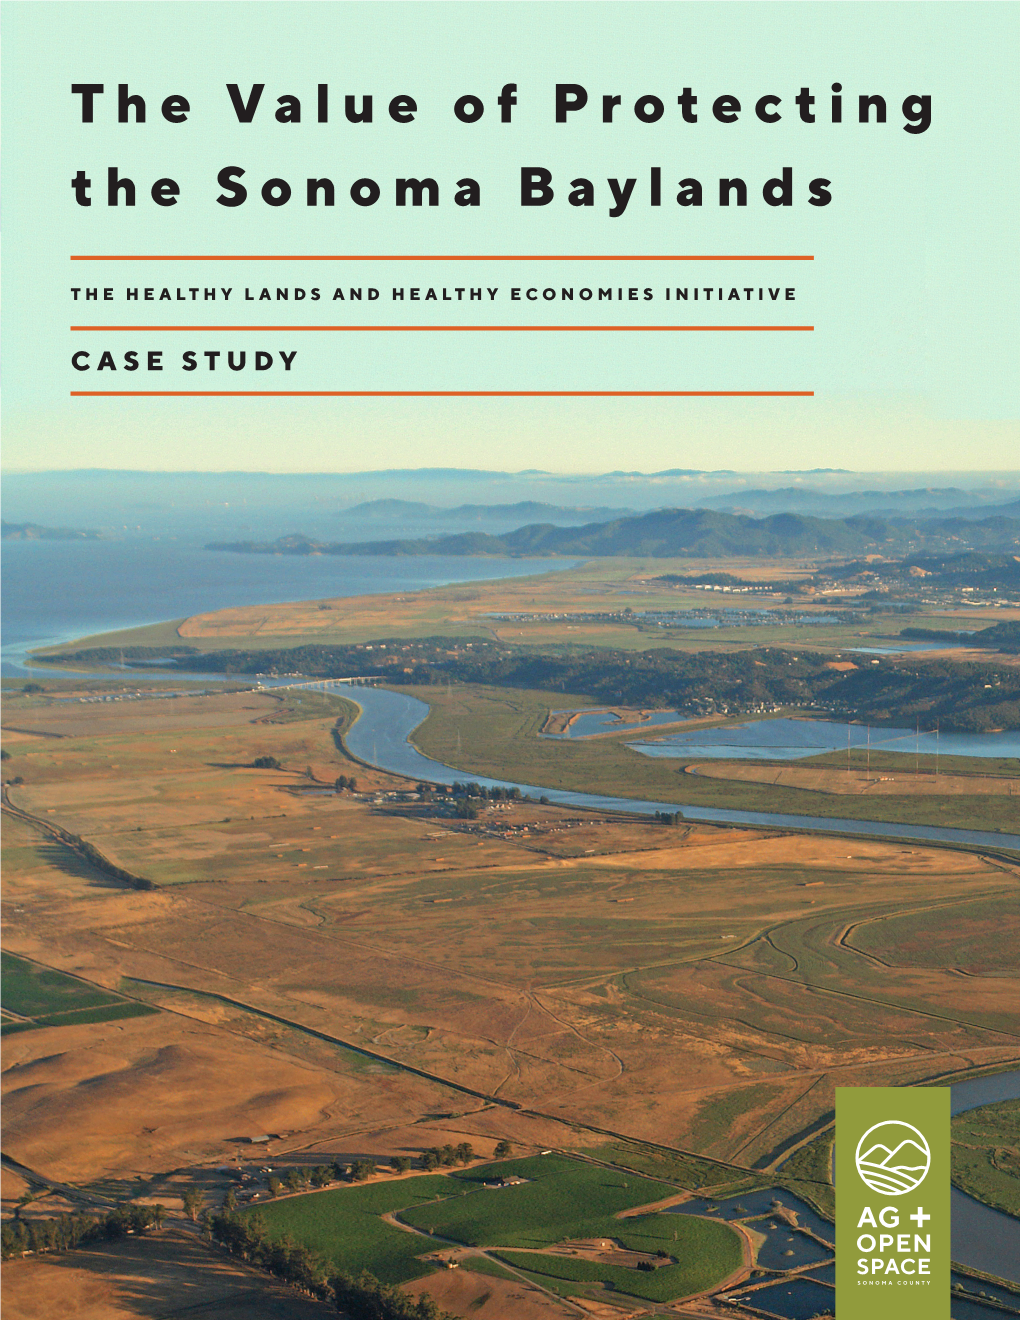 The Value of Protecting the Sonoma Baylands